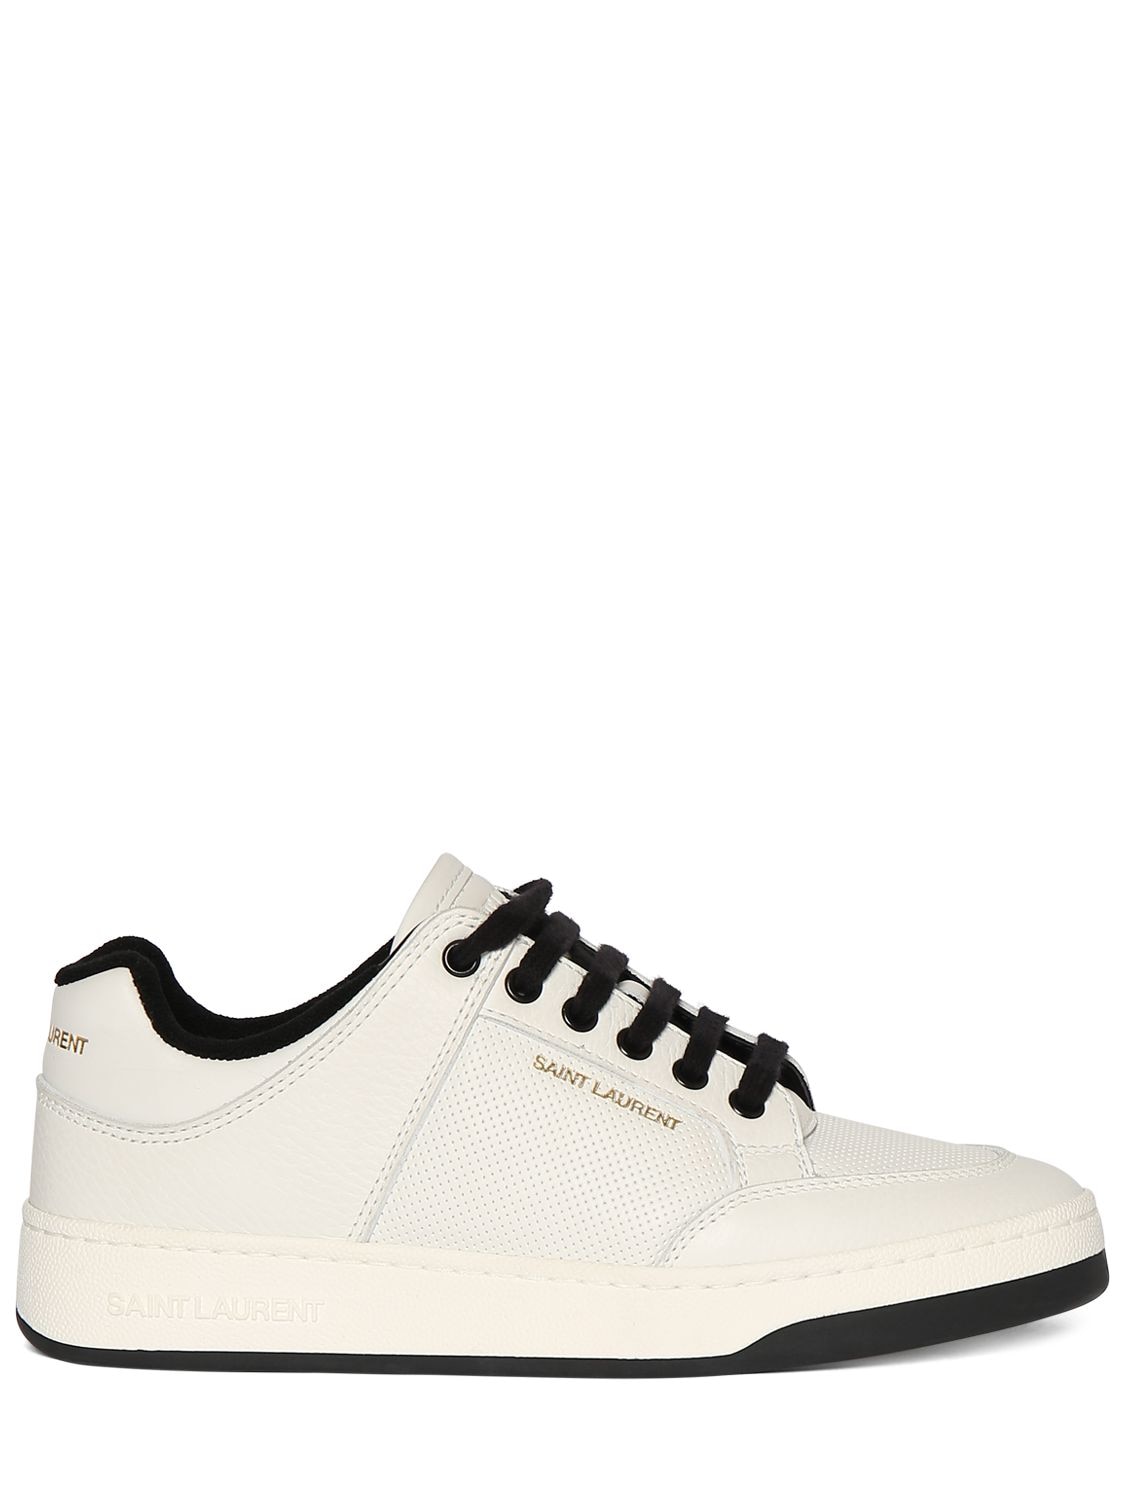 Saint Laurent 20mm Sl61 Low Top Leather Trainers In White,black